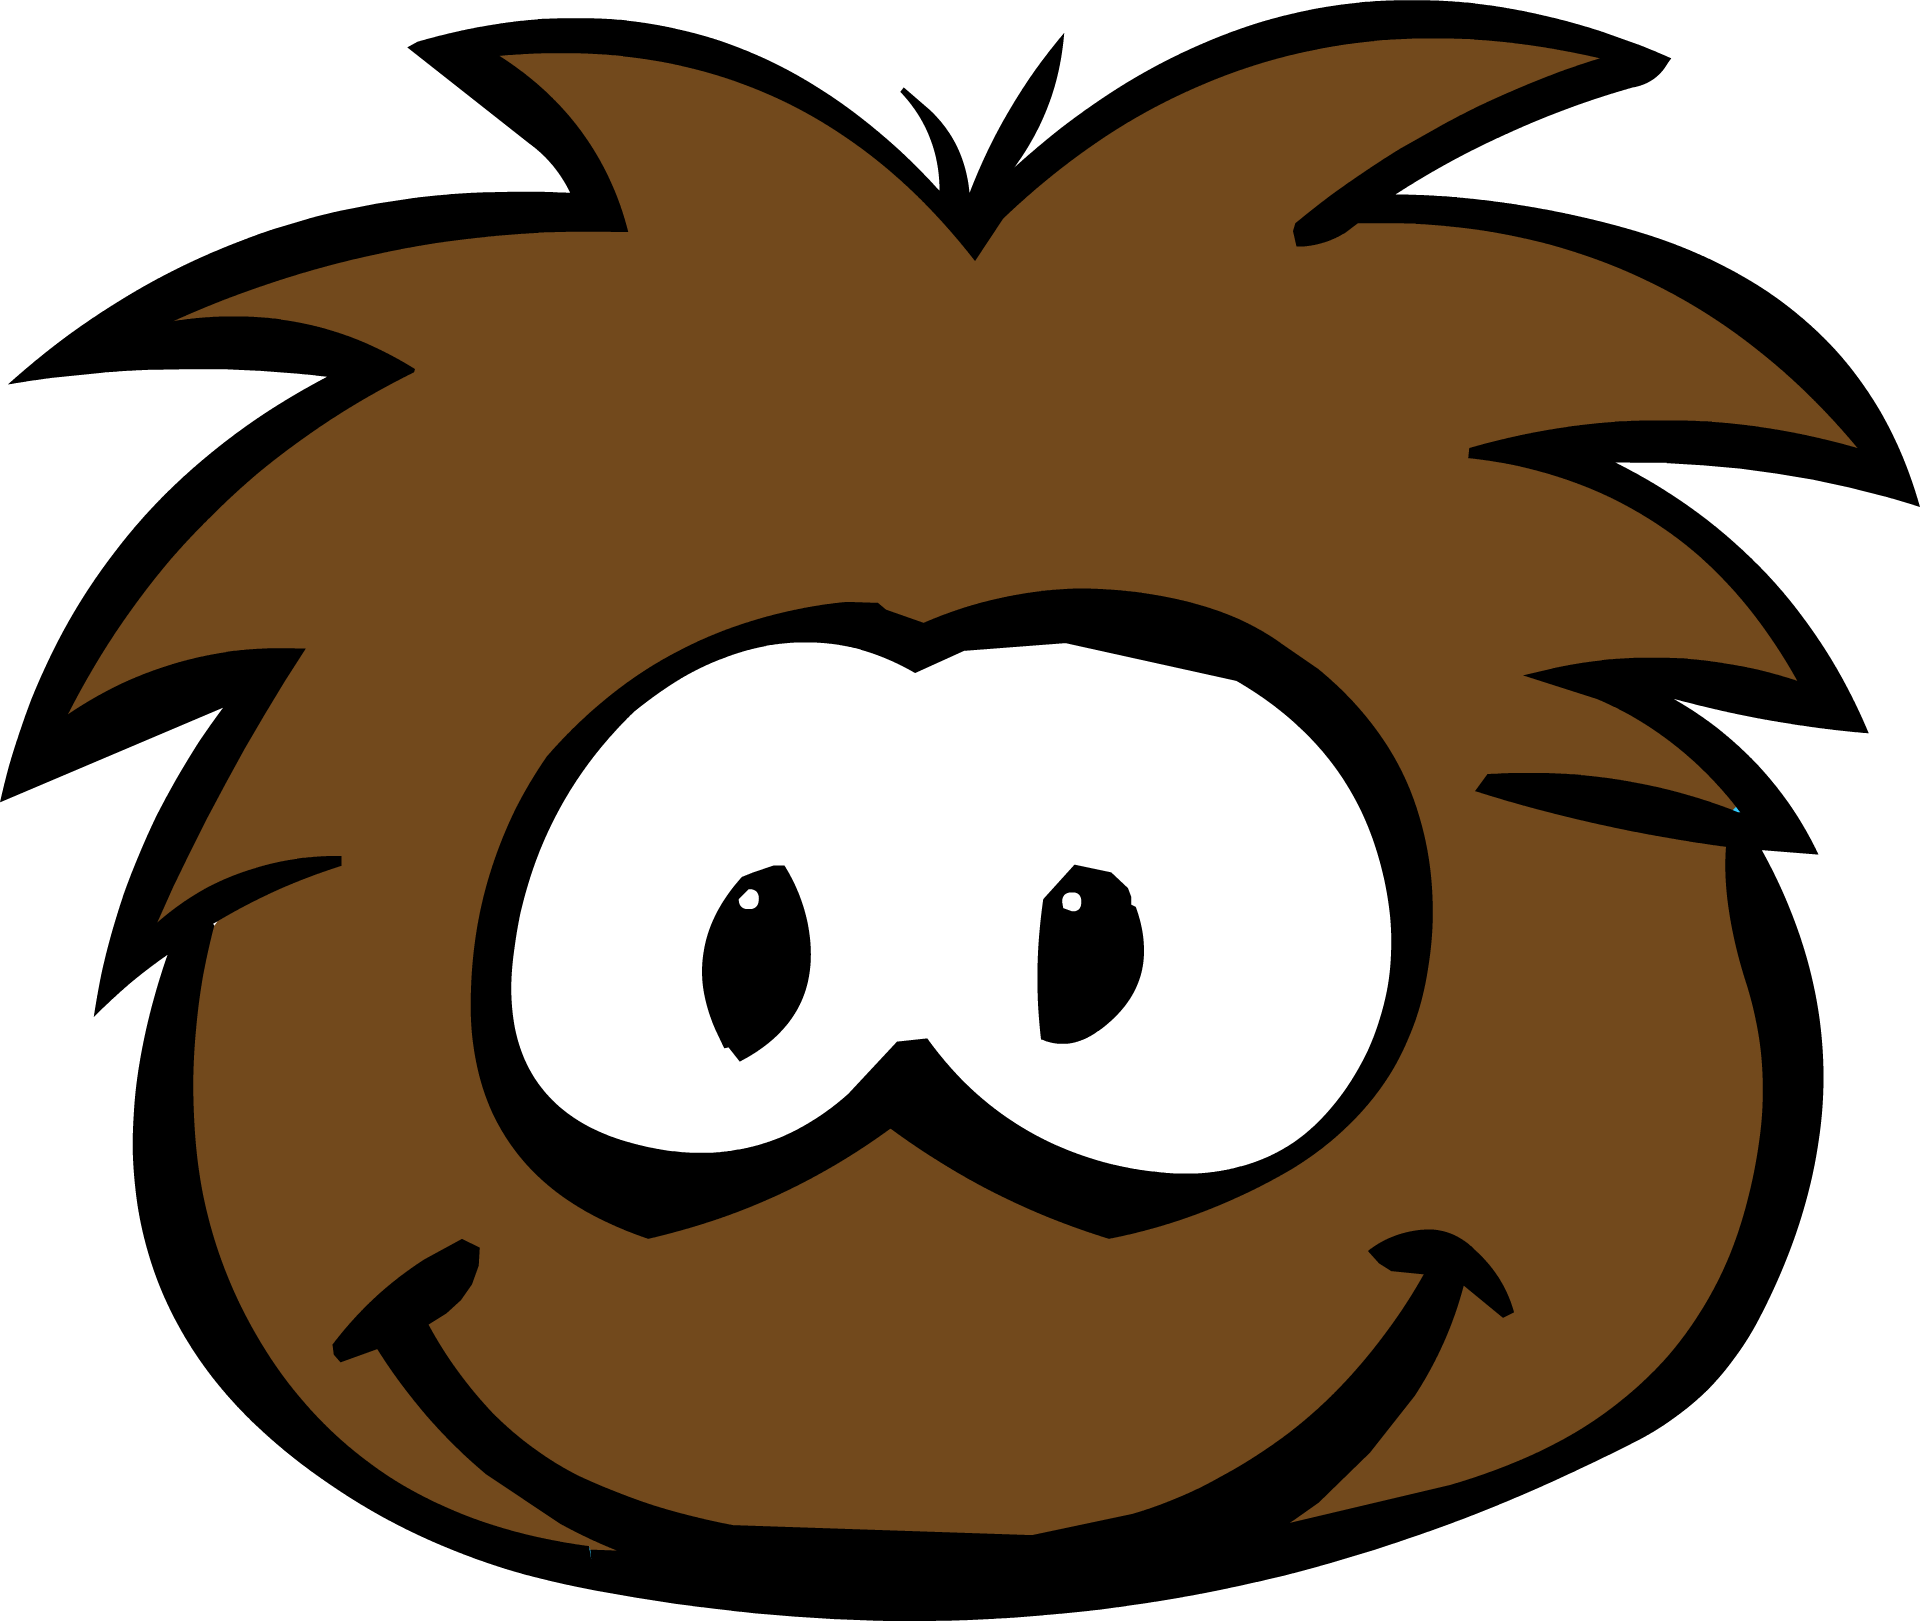 Brown Puffle Available In Pet Shop Club Penguin Cheats - Club Penguin Old Puffle (1920x1621)